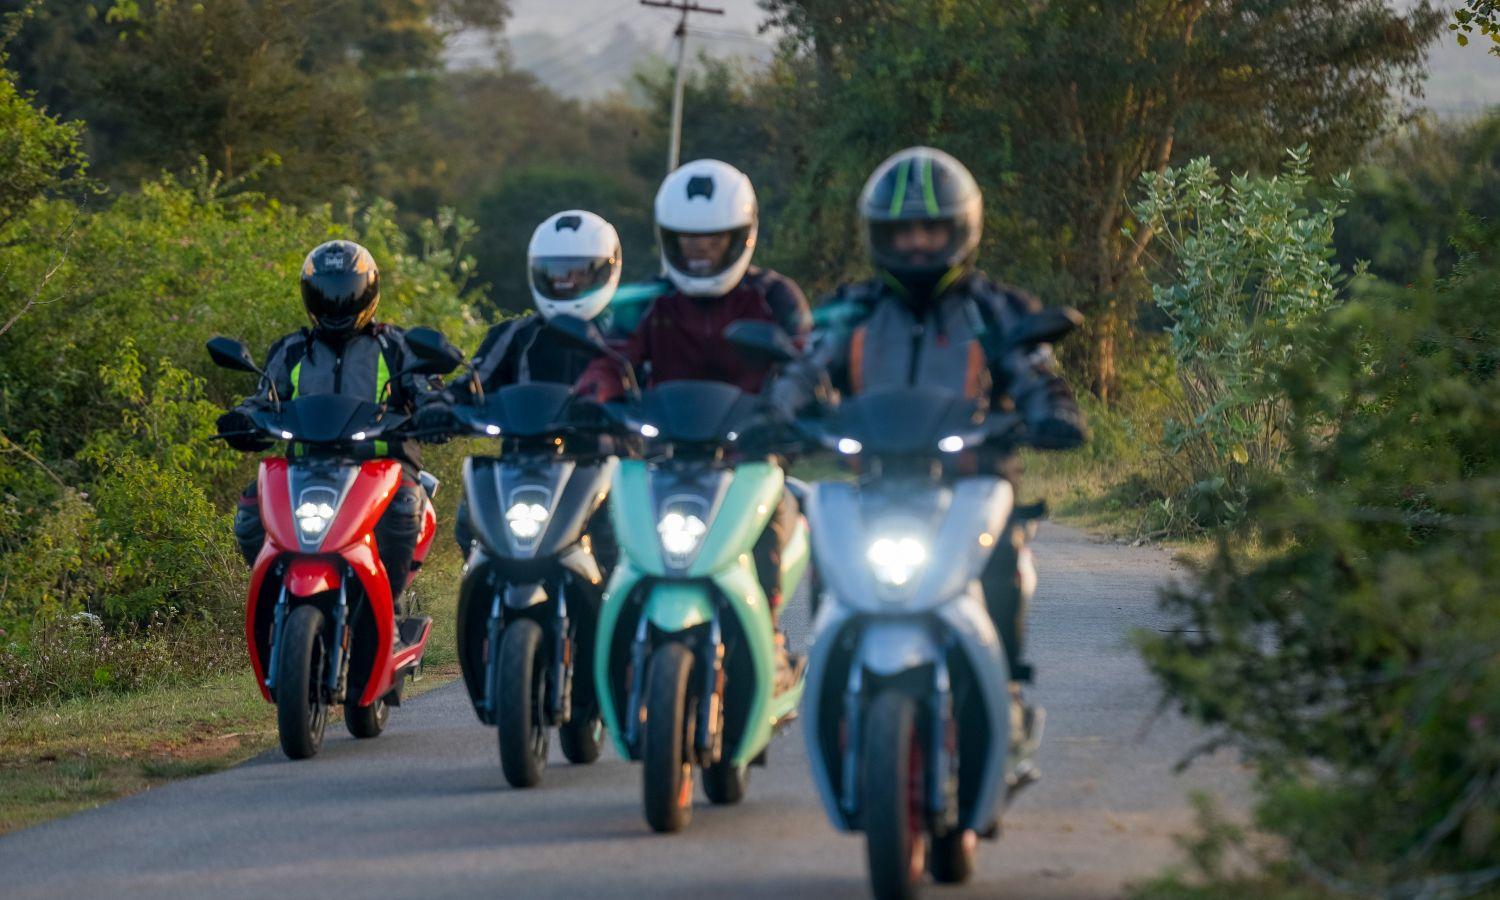 Ather Launches 4 New Colours, AtherStack 5.0 Update On First Ever Ather Community Day